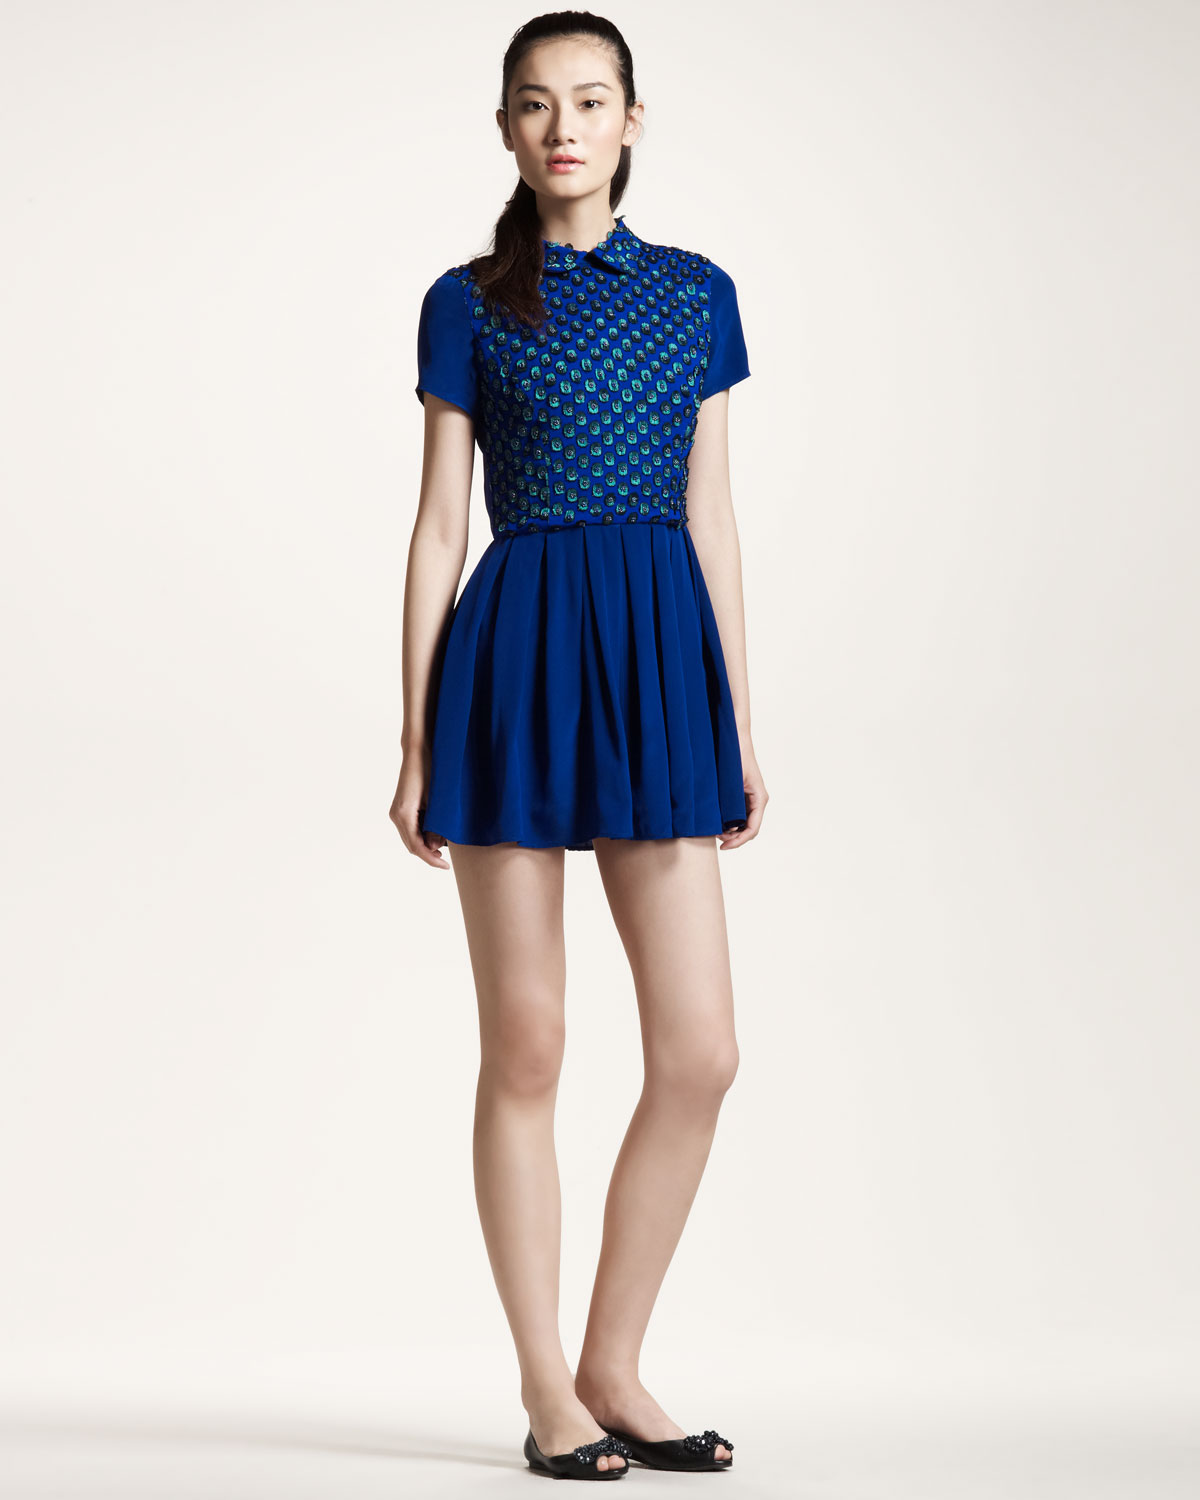 Lyst - Opening Ceremony Beadfront Dress in Blue